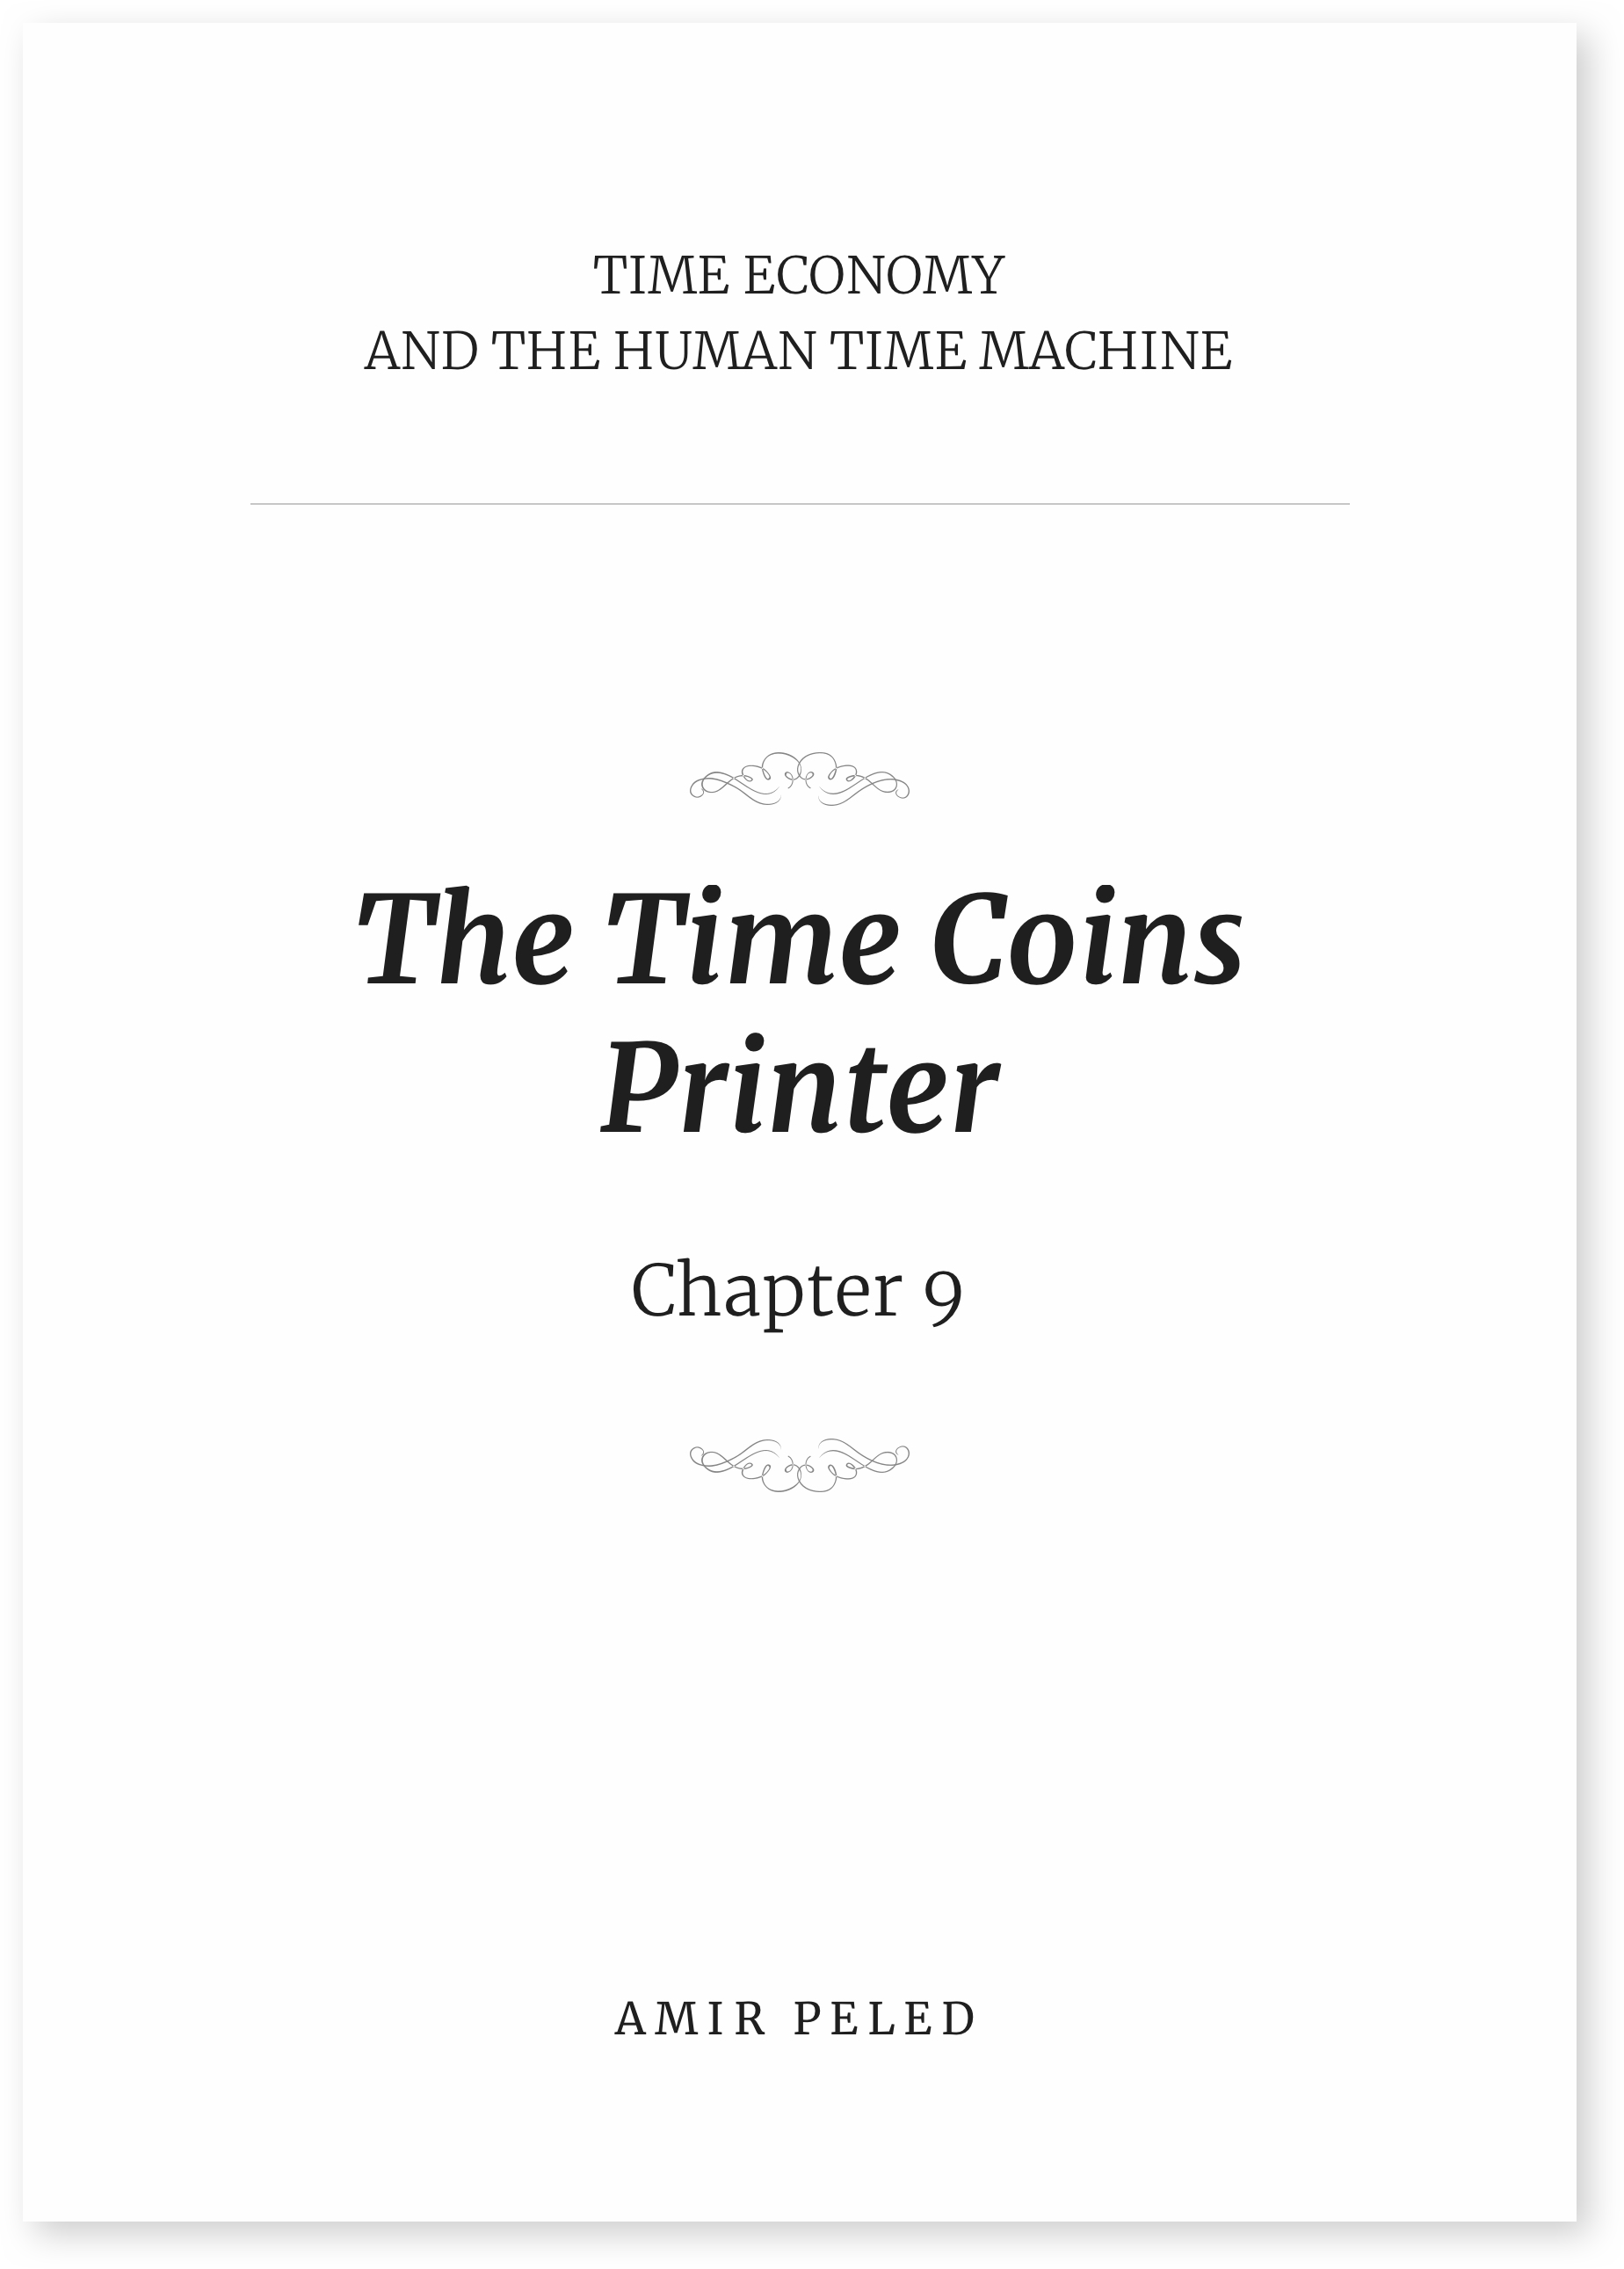 Chapter 9 - Time Economy and The Time Coins Printer